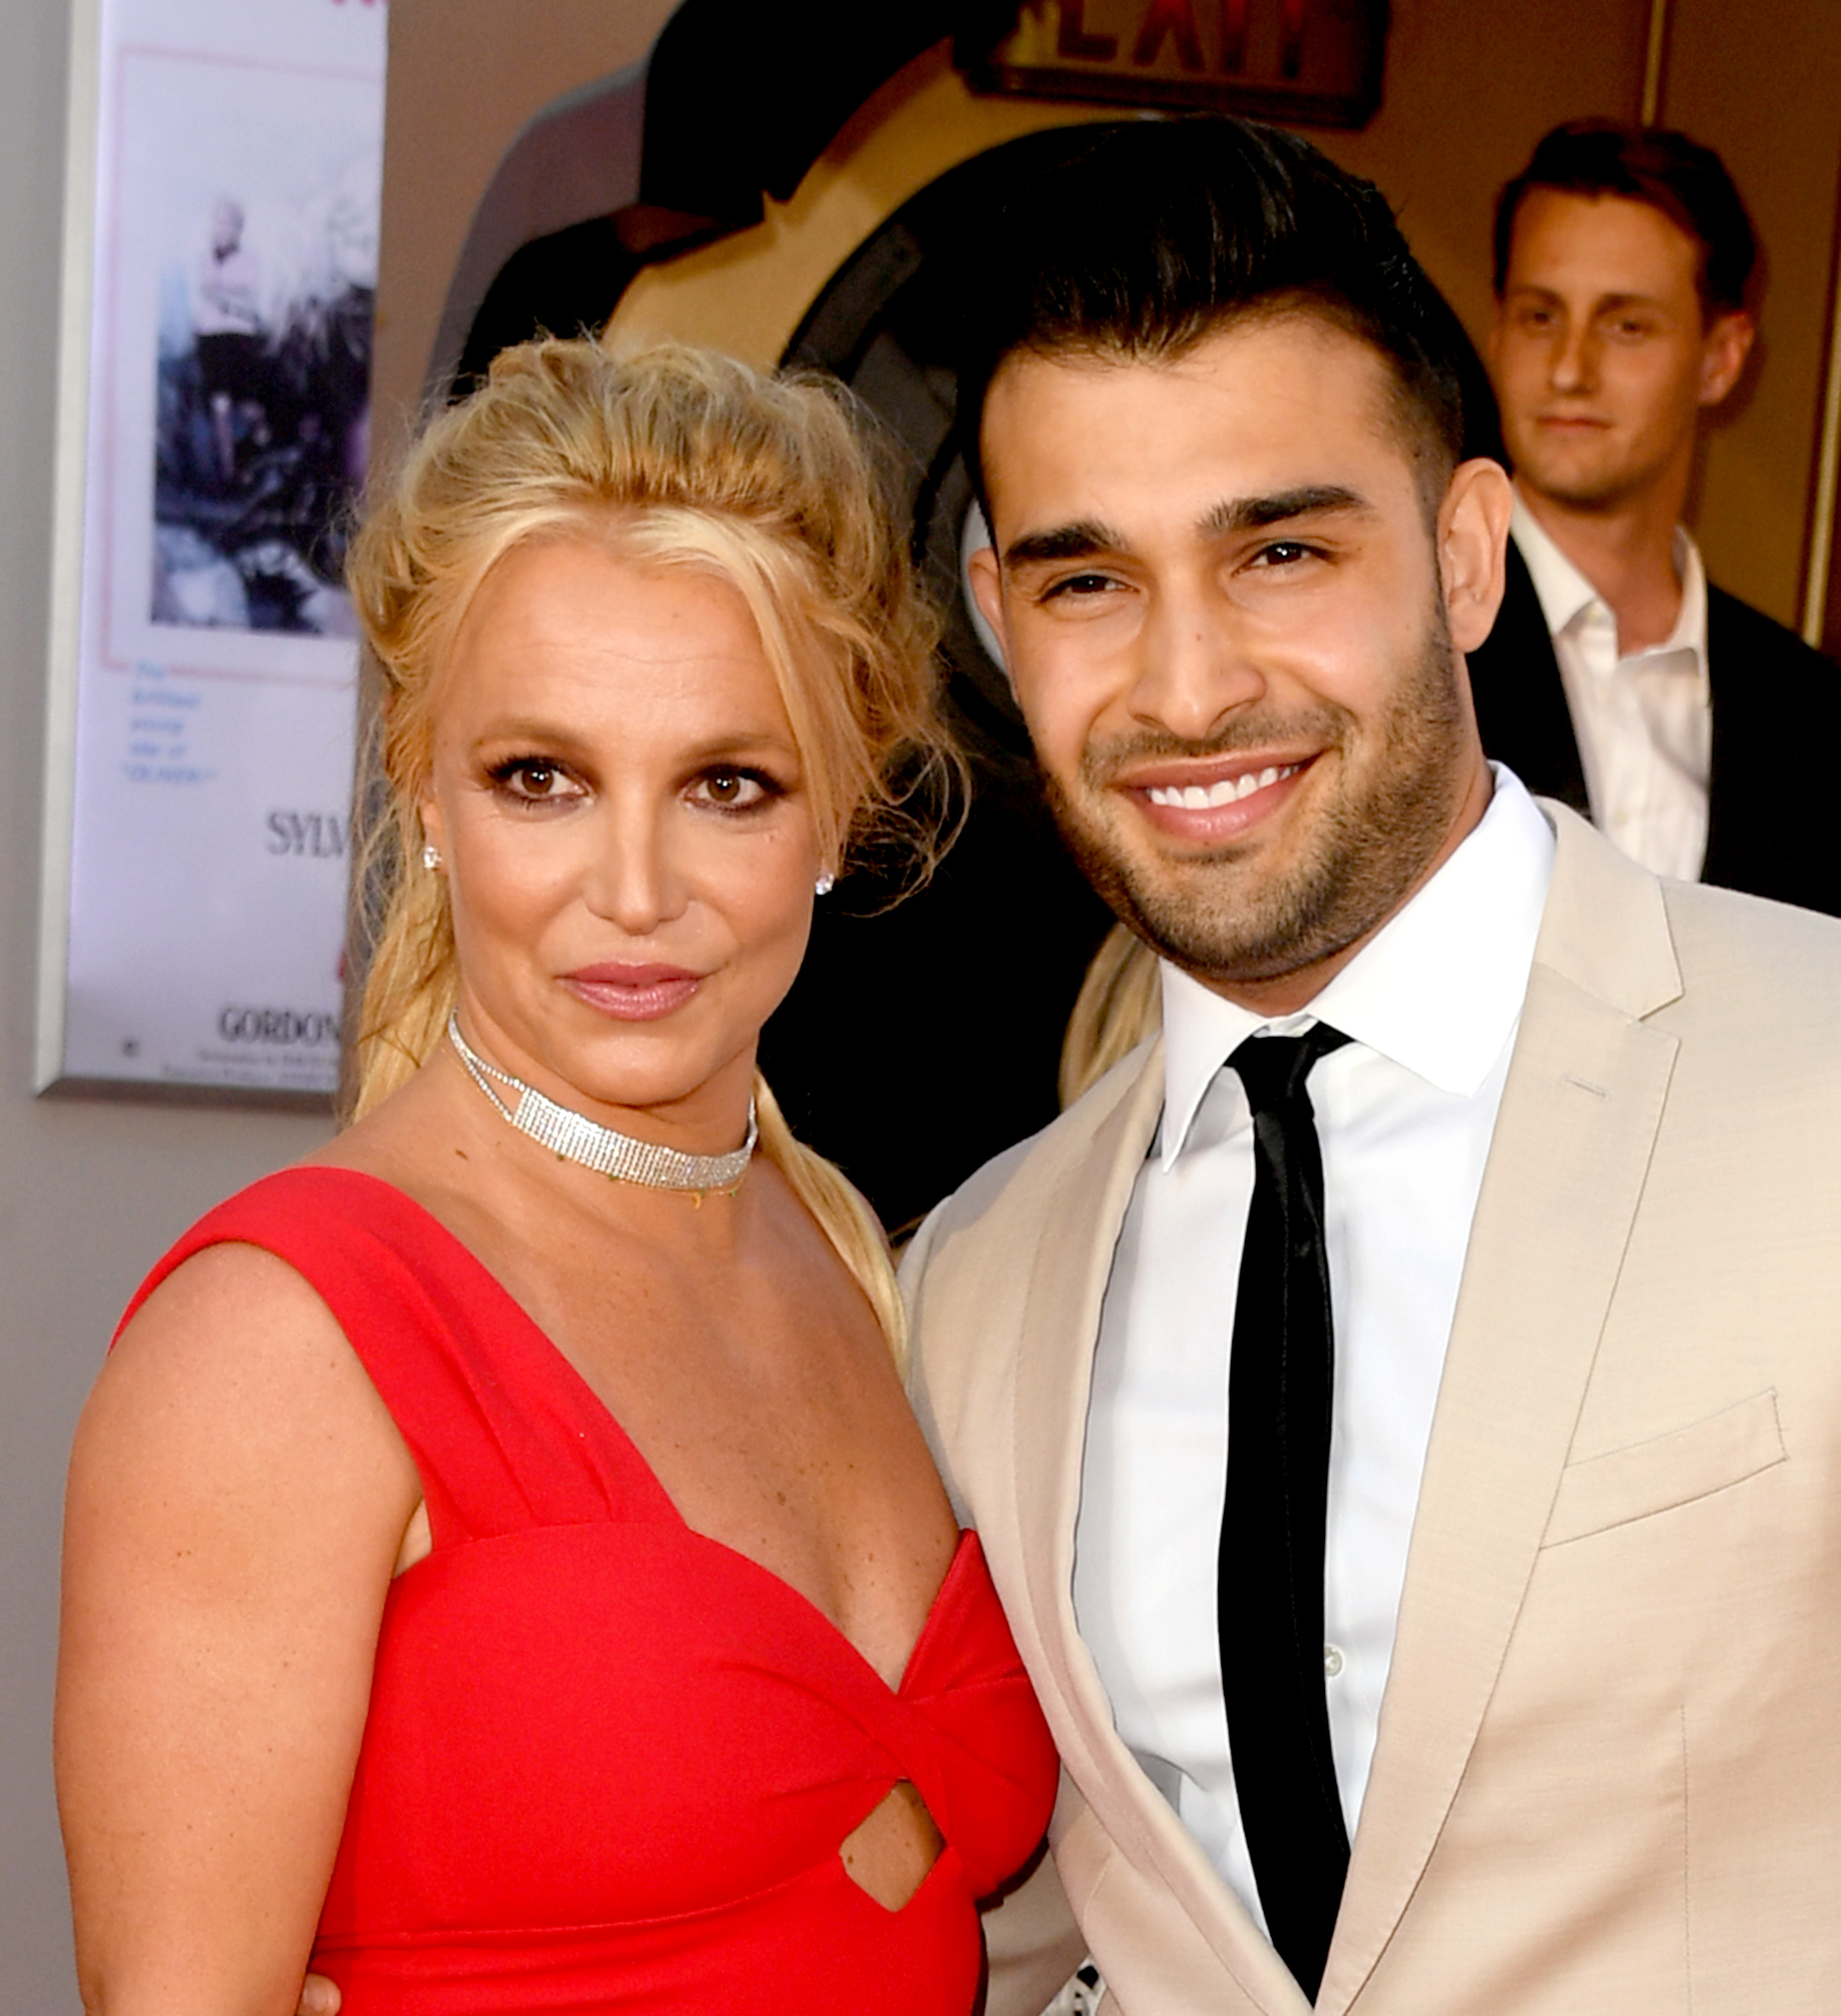 Britney Spears and Sam Asghari at the premiere of Sony Pictures' "One Upon A Time...In Hollywood" at the Chinese Theatre on July 22, 2019 in Hollywood, California | Source: Getty Images